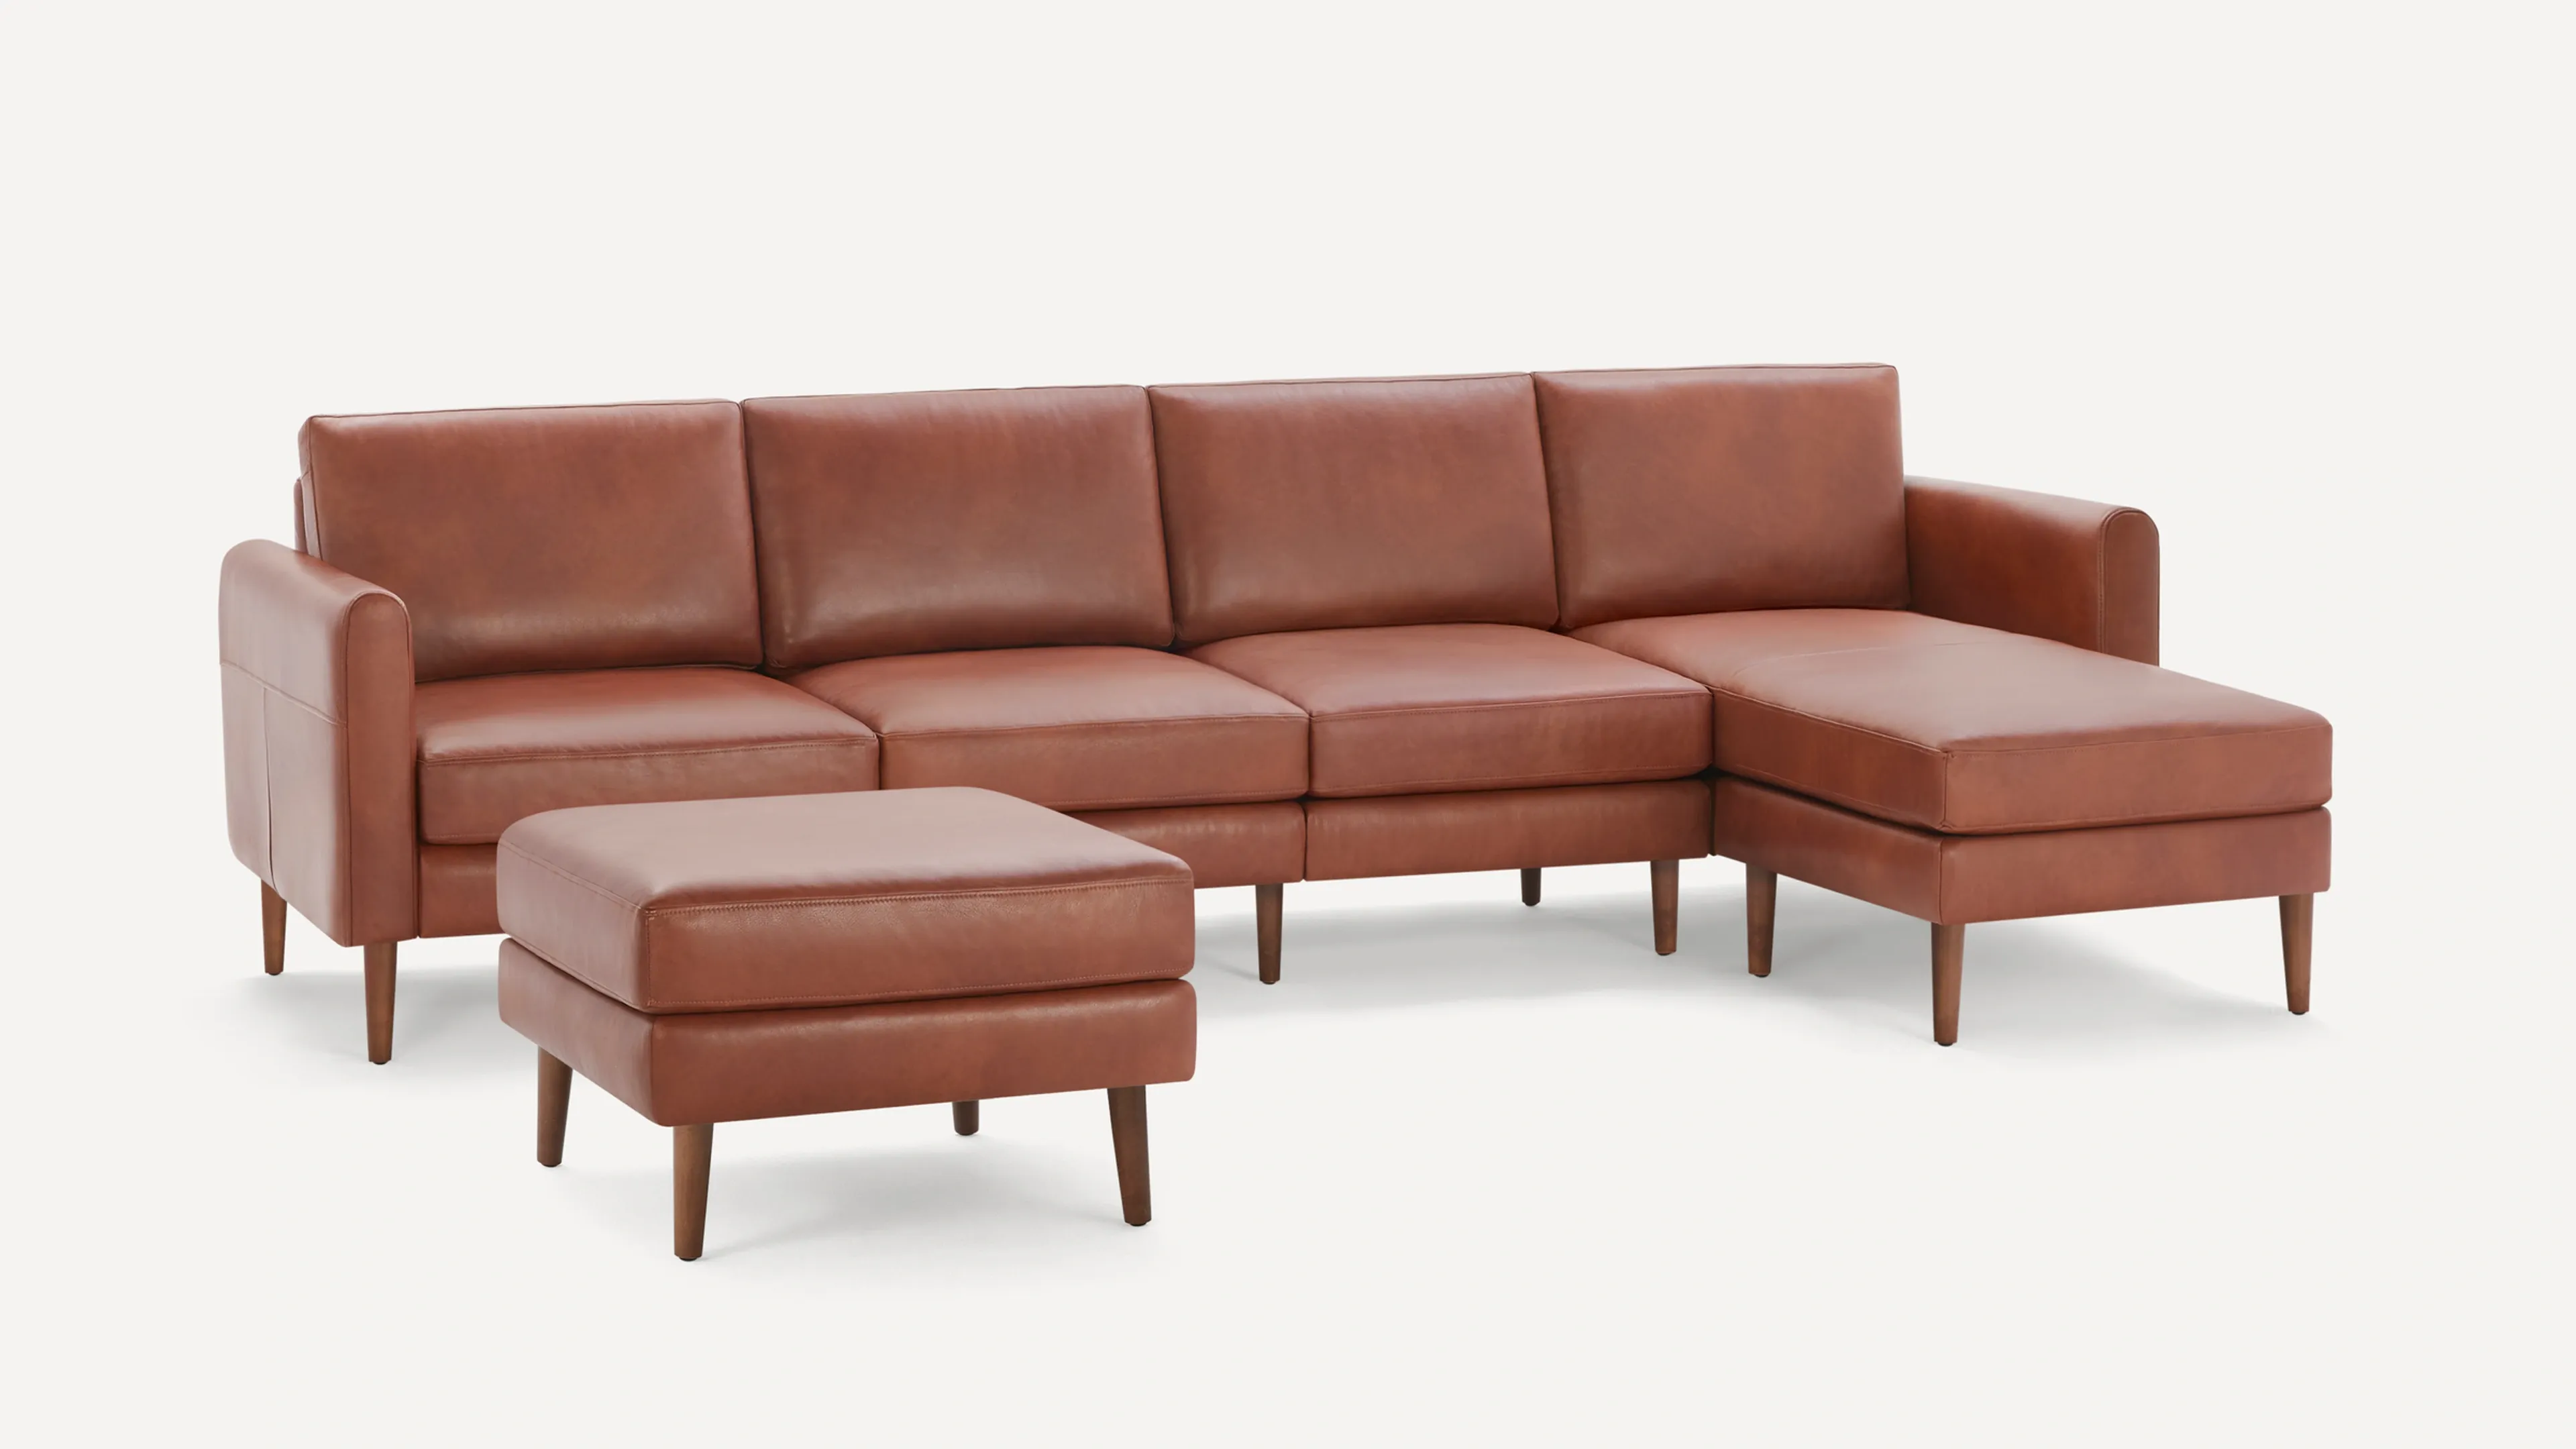 Original Chaise King Sofa in Chestnut Leather